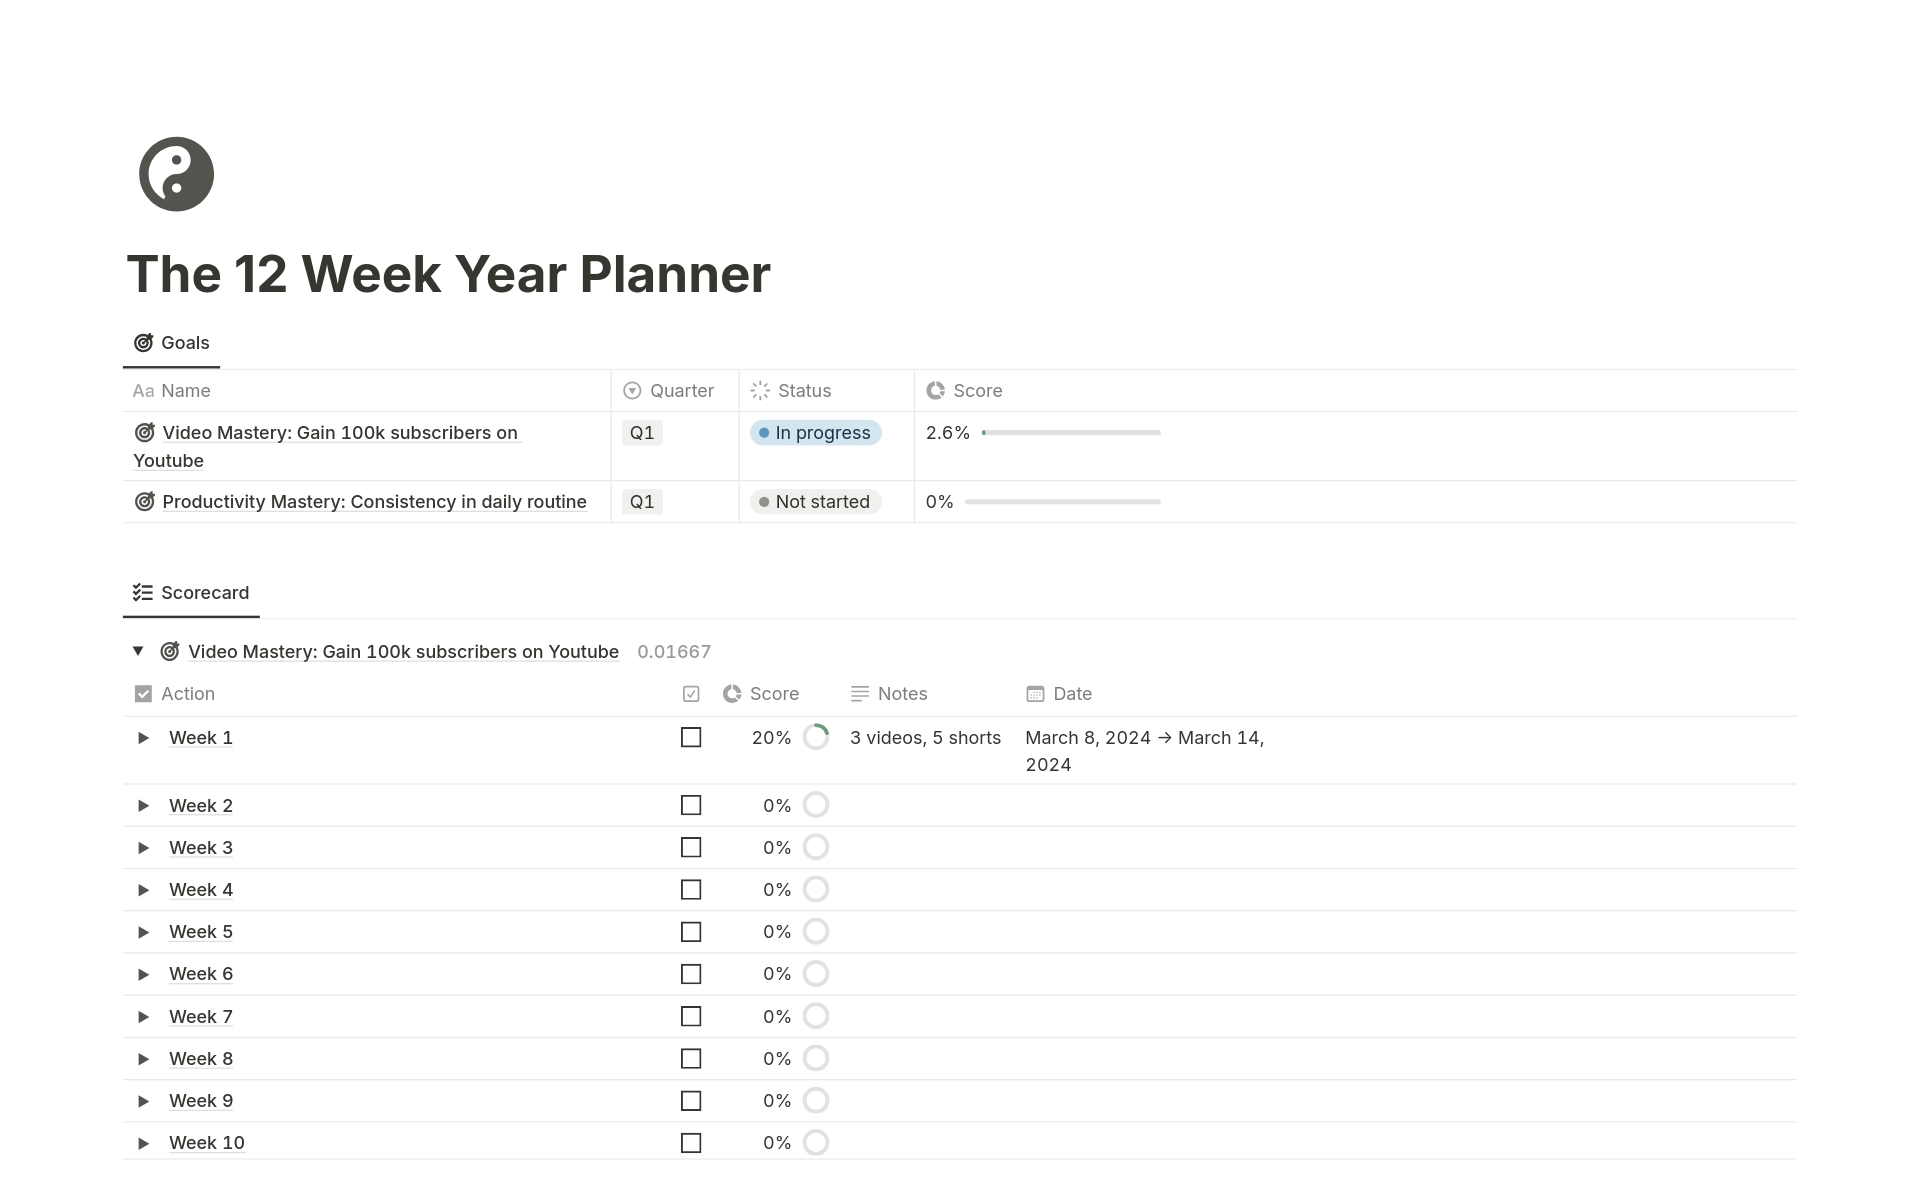 Level up your planning game with our 12-Week Planner Template. Set goals, break them into 12-week plans, and crush tasks week by week. Stay focused, achieve more.